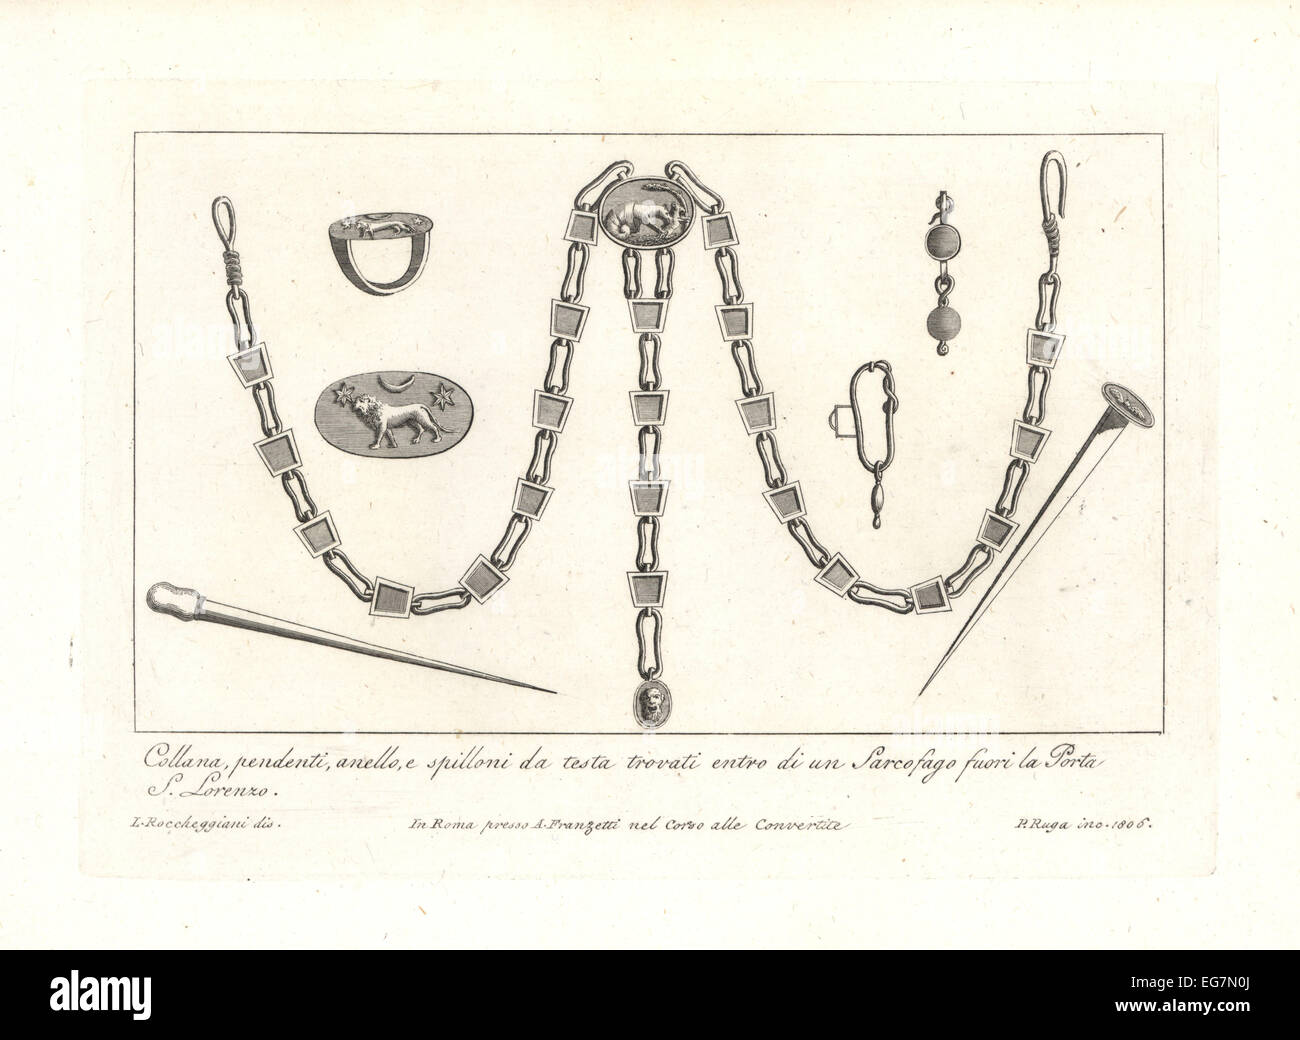 Chain necklace, ring, earrings and pins from a head found in a sarcophagus. Stock Photo